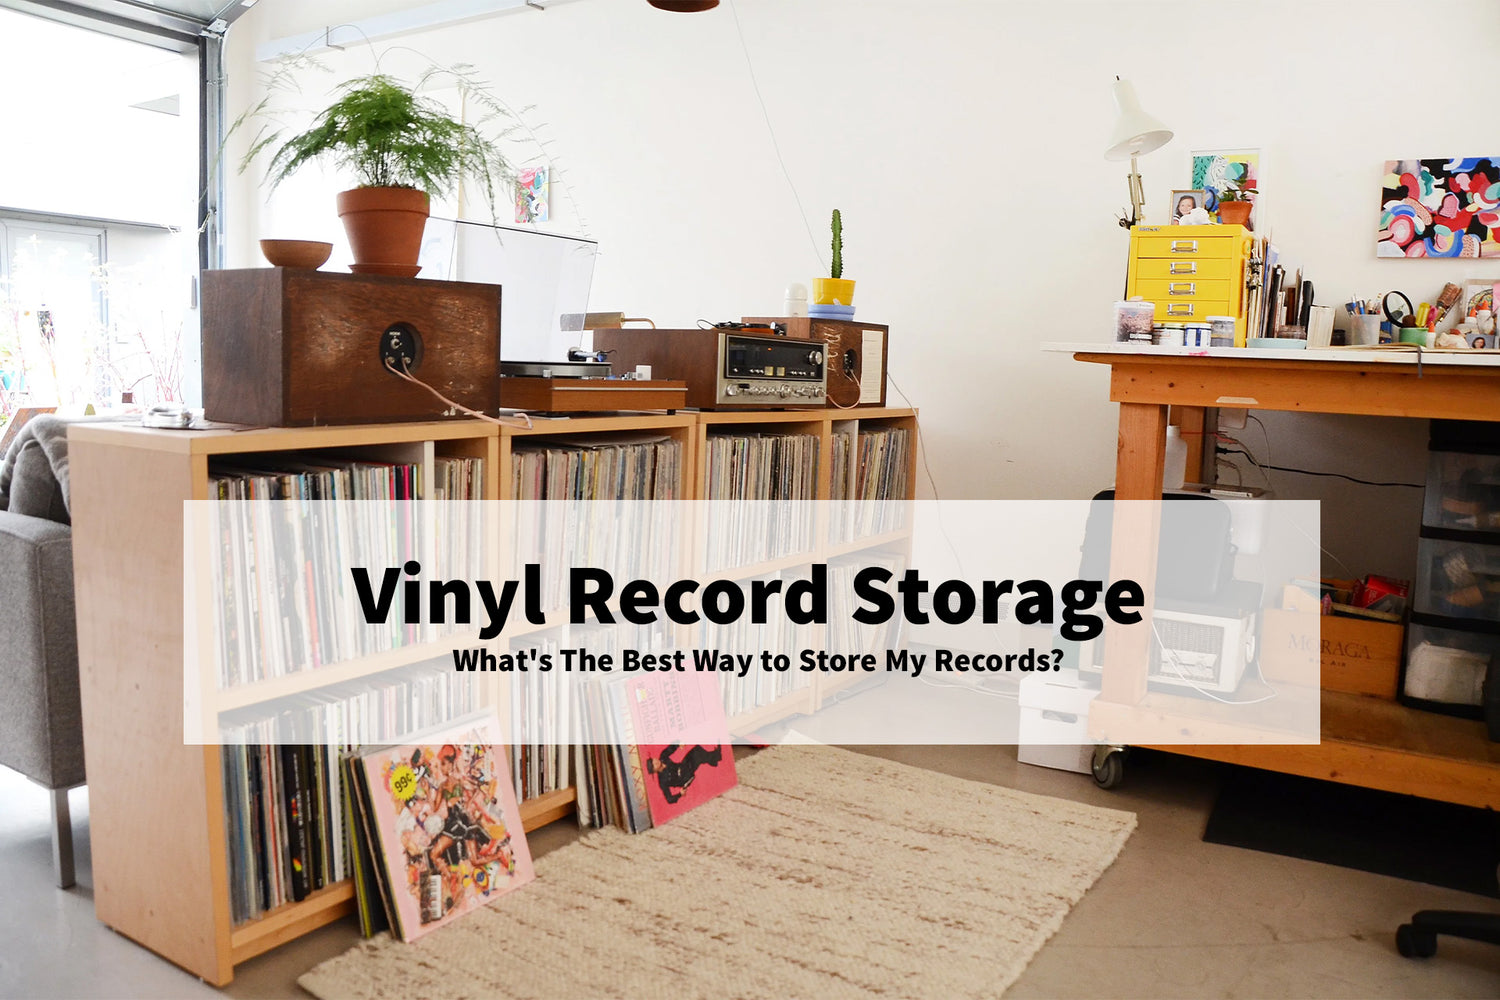 What's The Best Way To Store My Records?